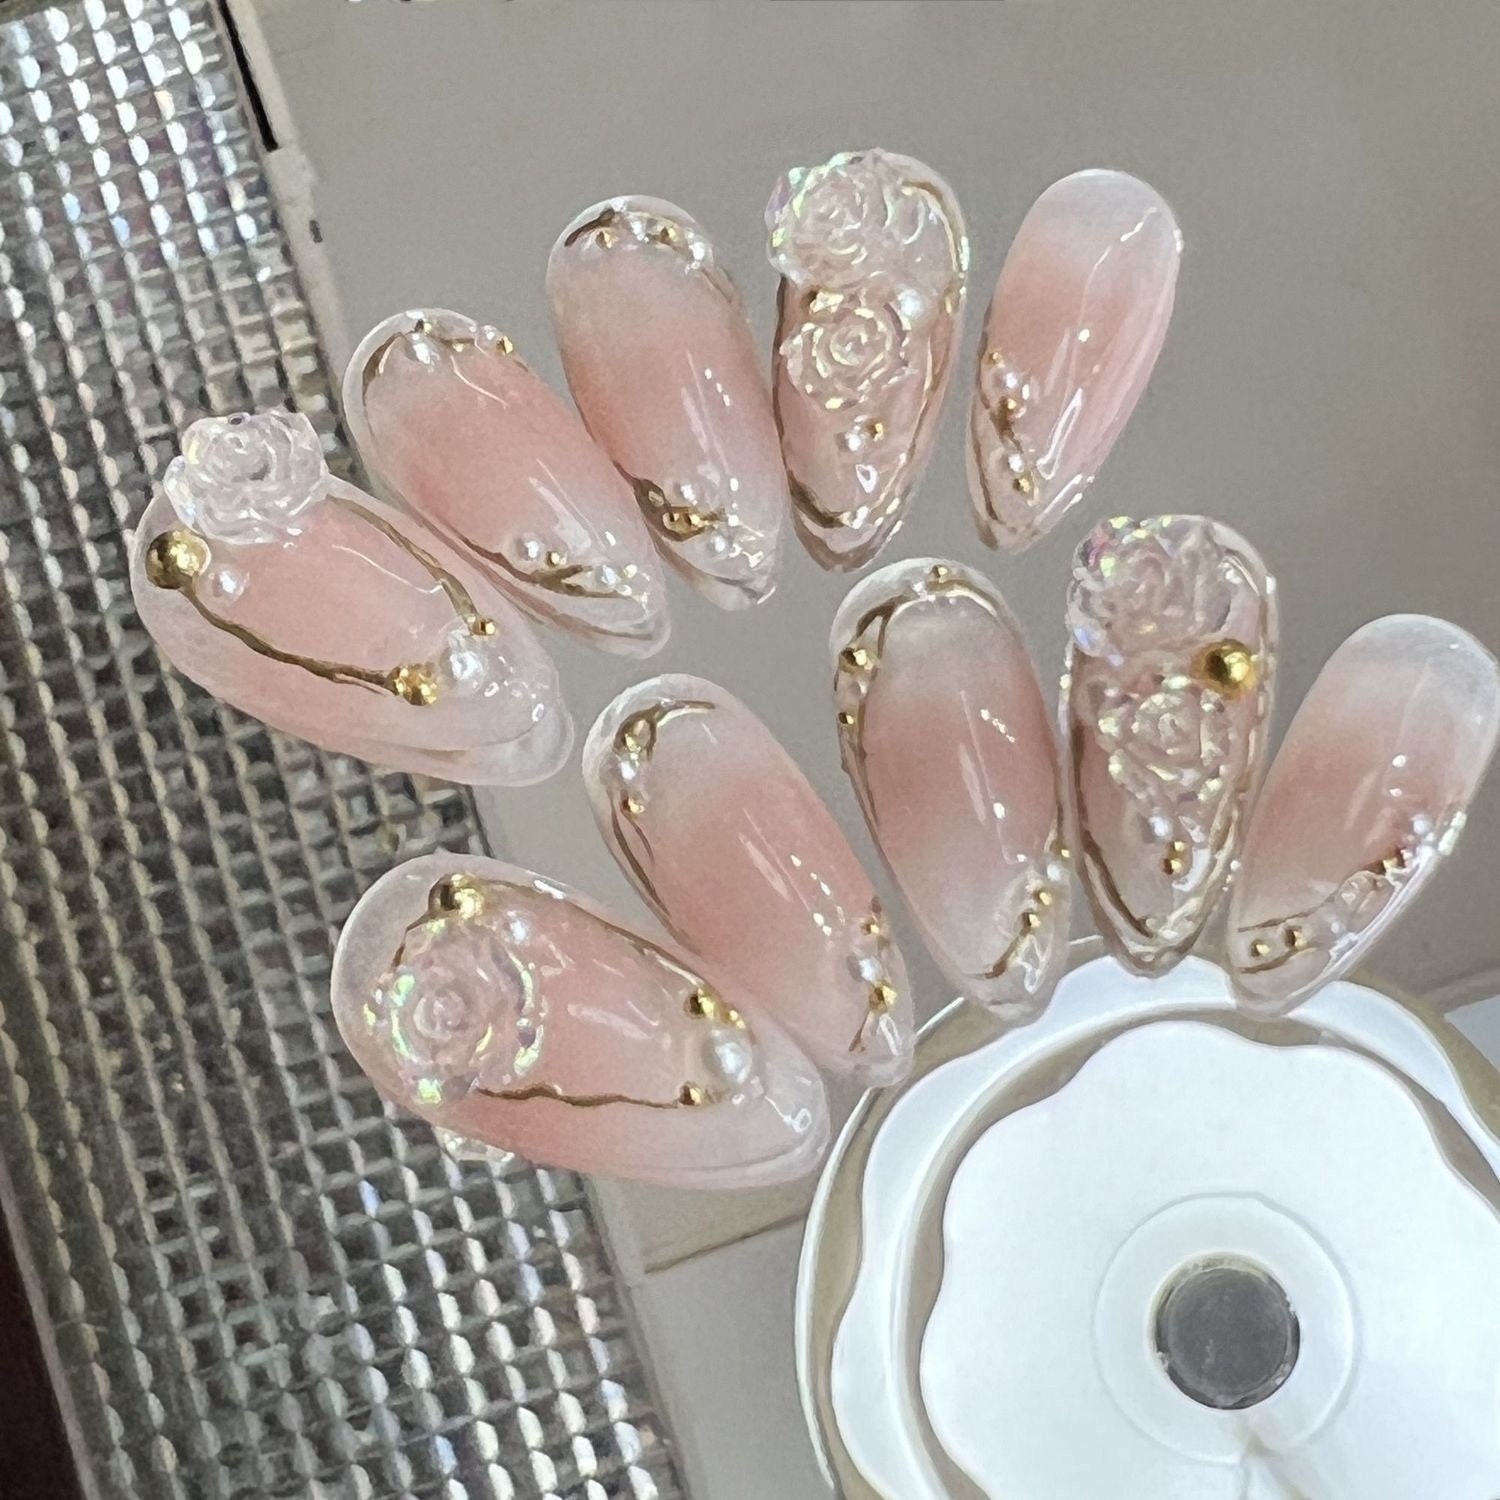 Aura Blush Ombre Press on Nails With 3D Rosa Alba Flower Press - Etsy